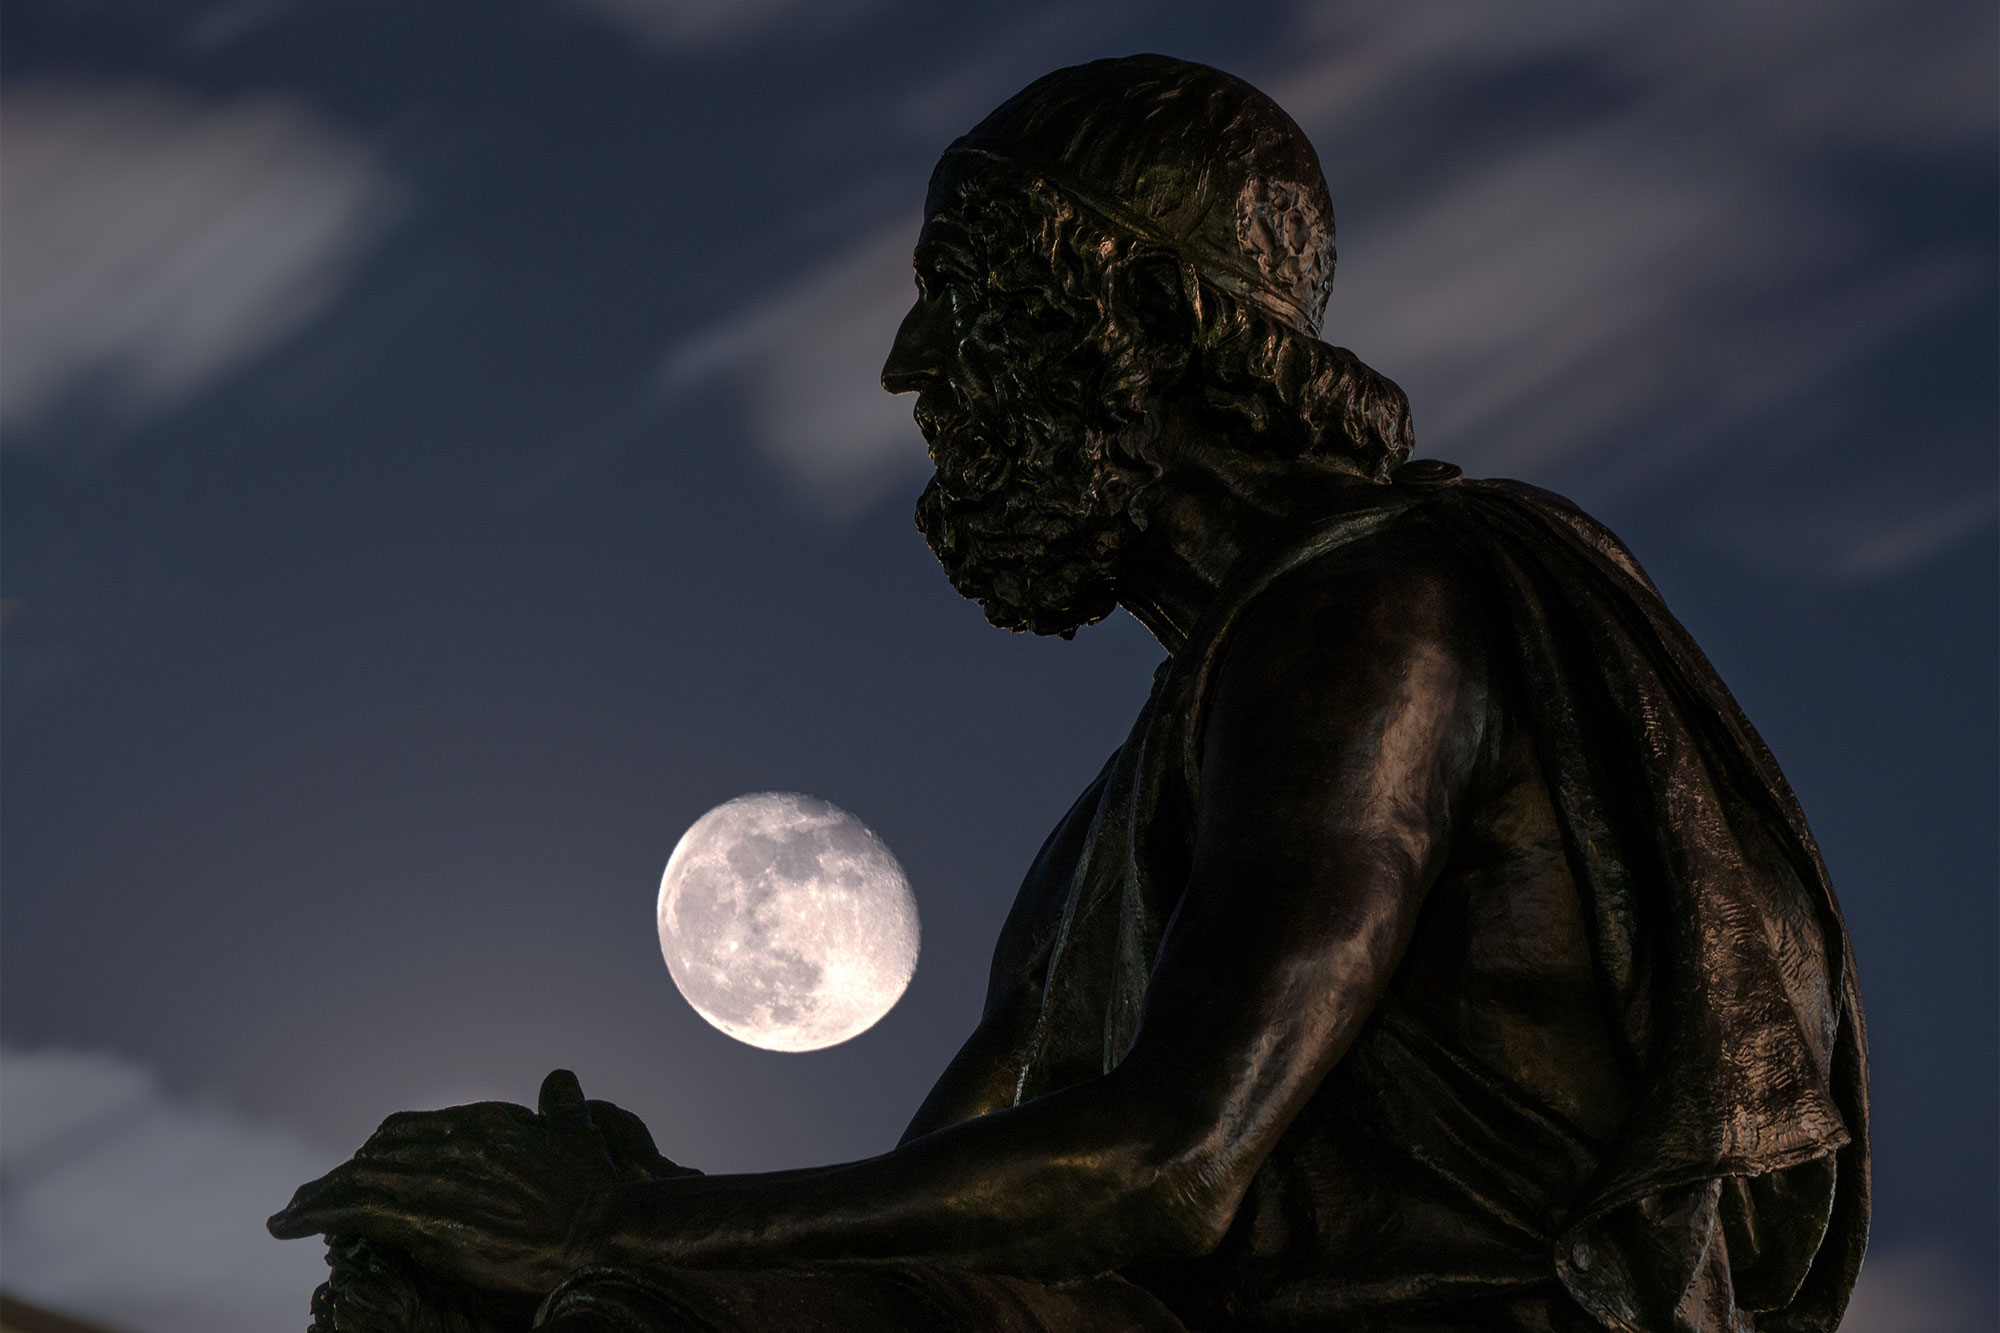 A gibbous moon is visible from the left side of UVA's Statue of Homer at night